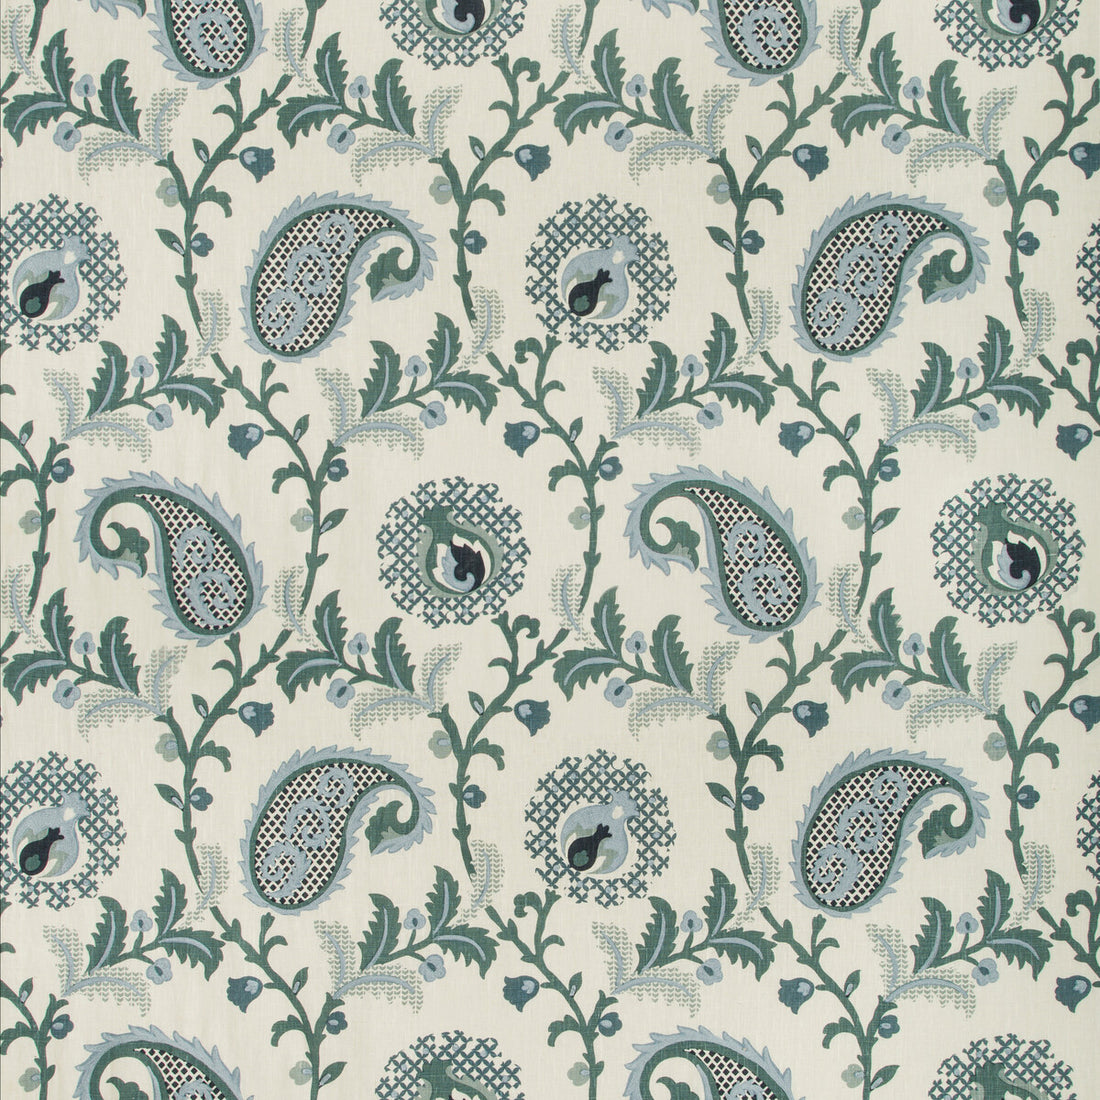 Saudade Paisley fabric in bay color - pattern SAUDADE.15.0 - by Kravet Design in the Barclay Butera Sagamore collection